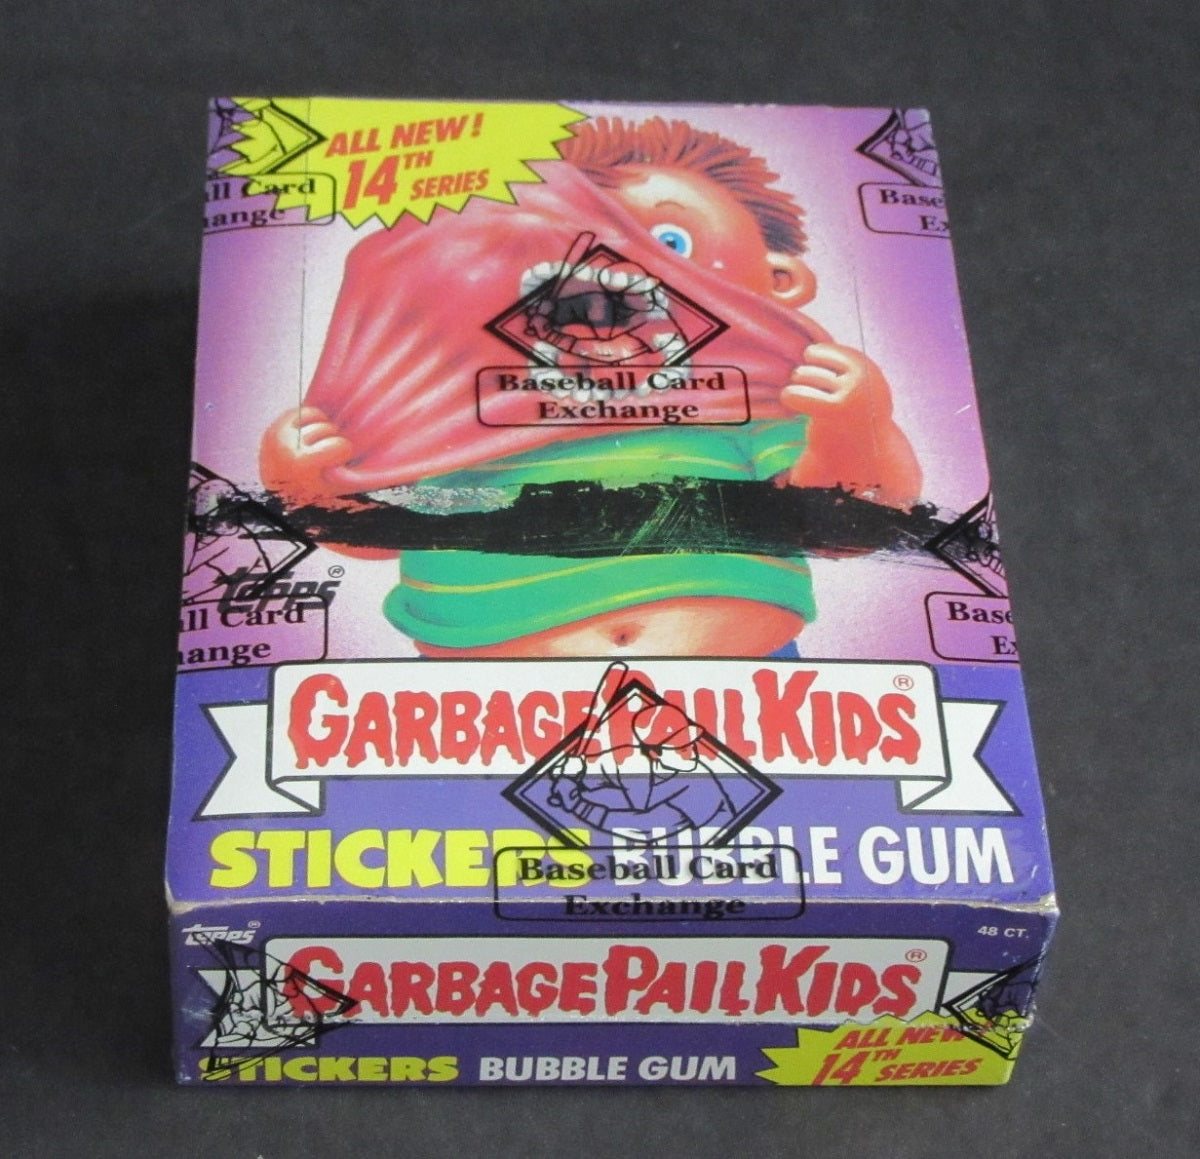 1988 Topps Garbage Pail Kids Series 14 Unopened Wax Box (w/ price) (X-Out) (Poster) (BBCE)